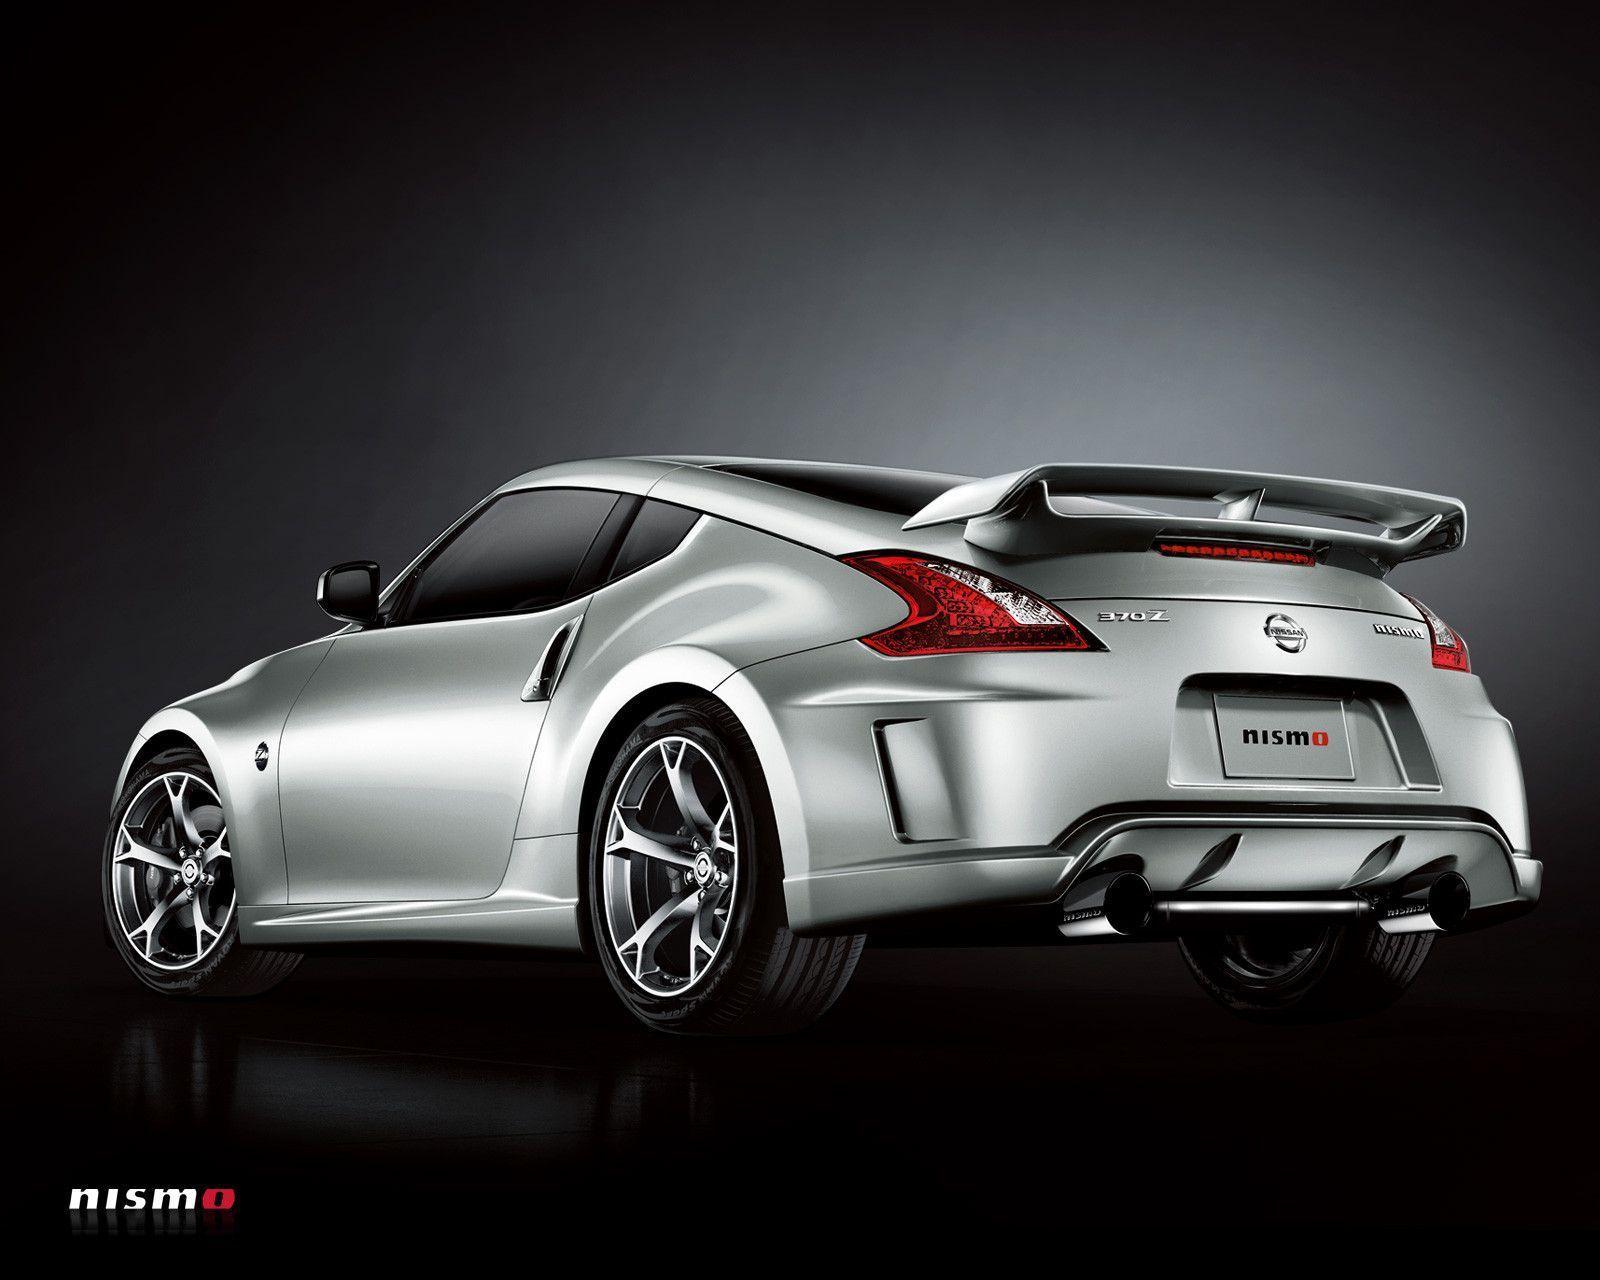 Nissan 370z Nismo Wallpaper Image & Picture